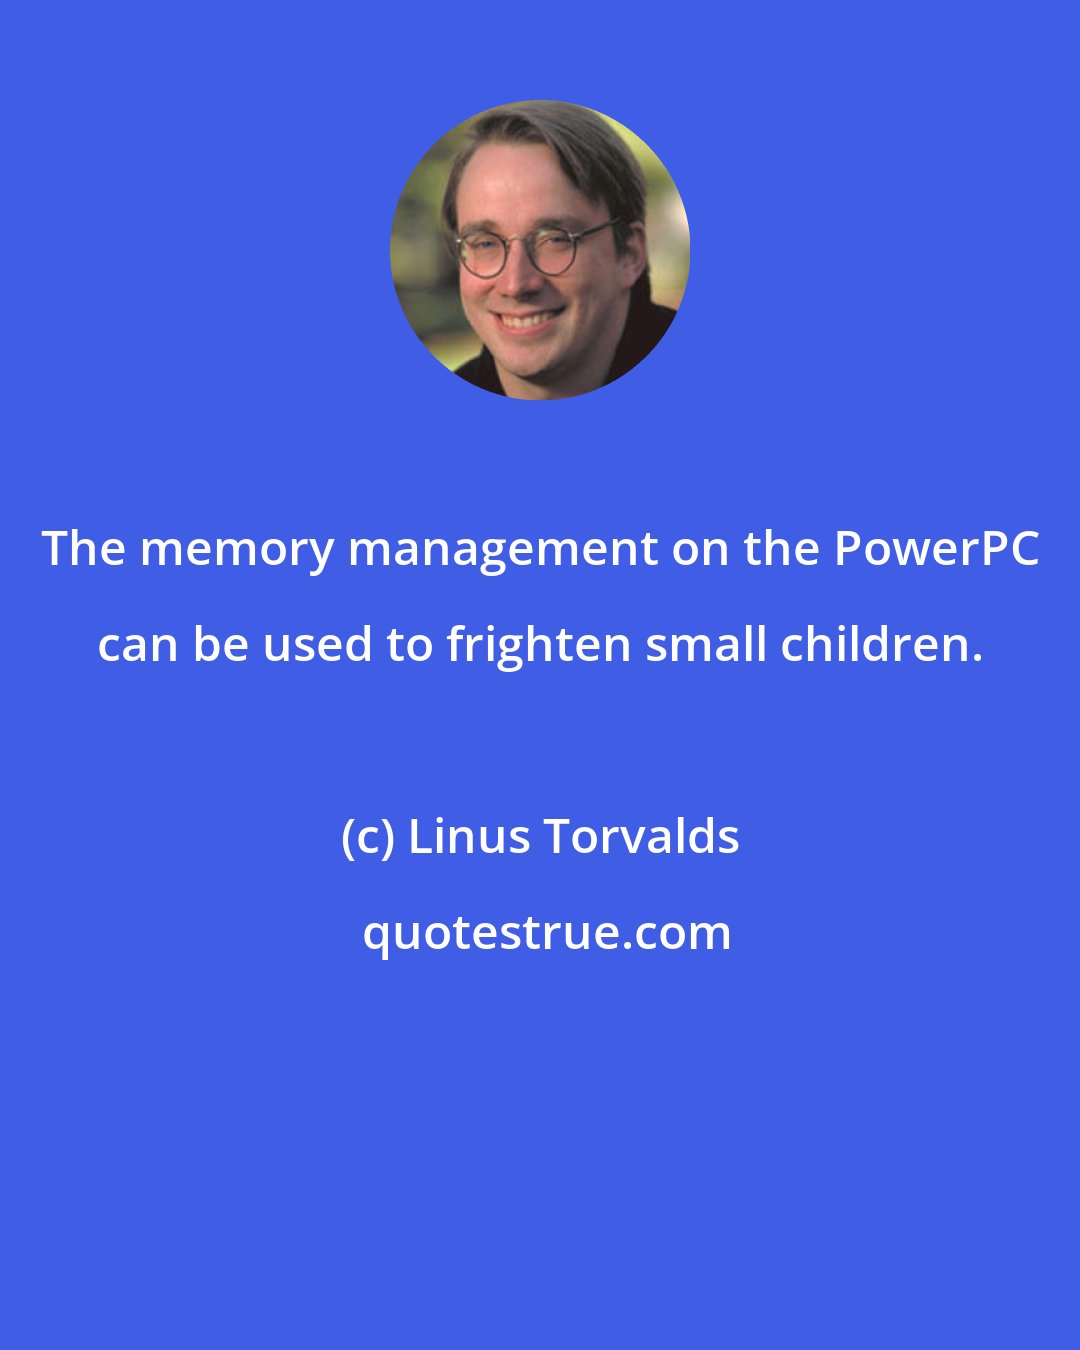 Linus Torvalds: The memory management on the PowerPC can be used to frighten small children.